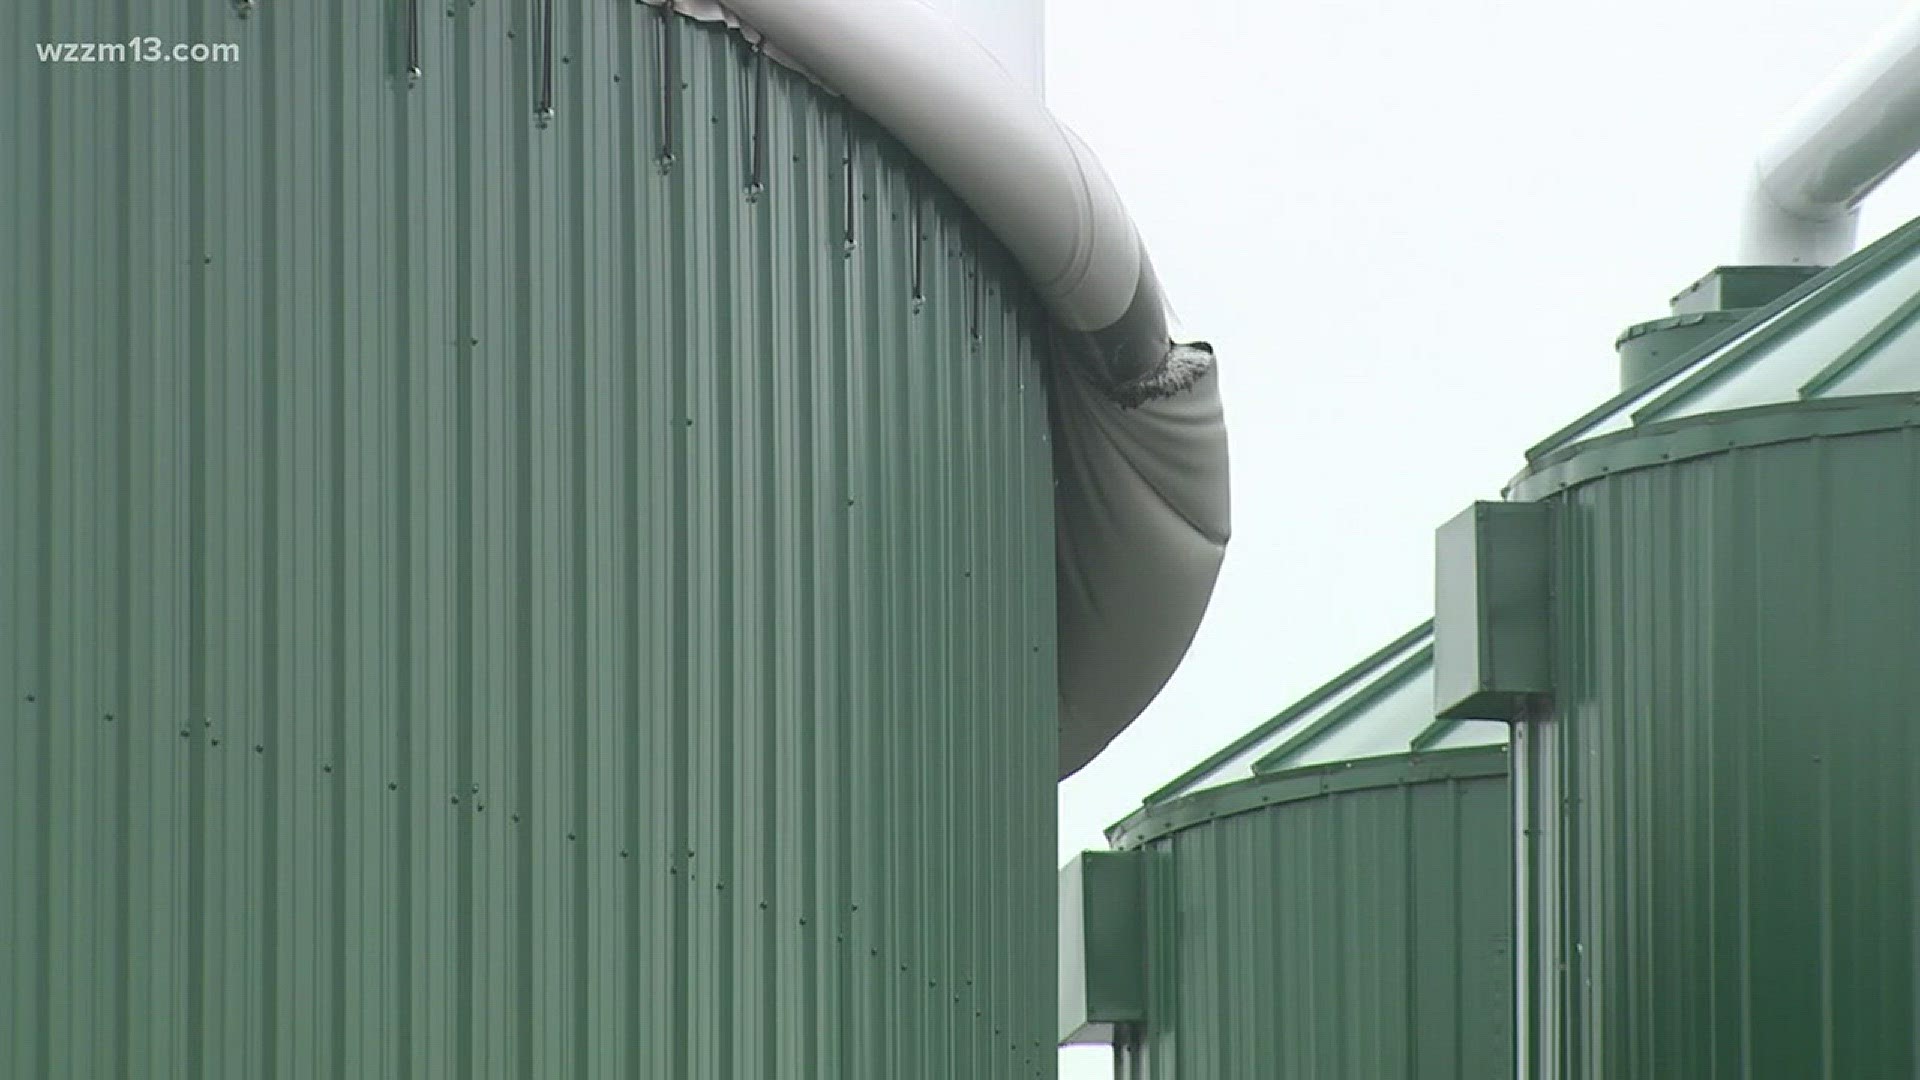 Biodigester in Lowell is up for auction